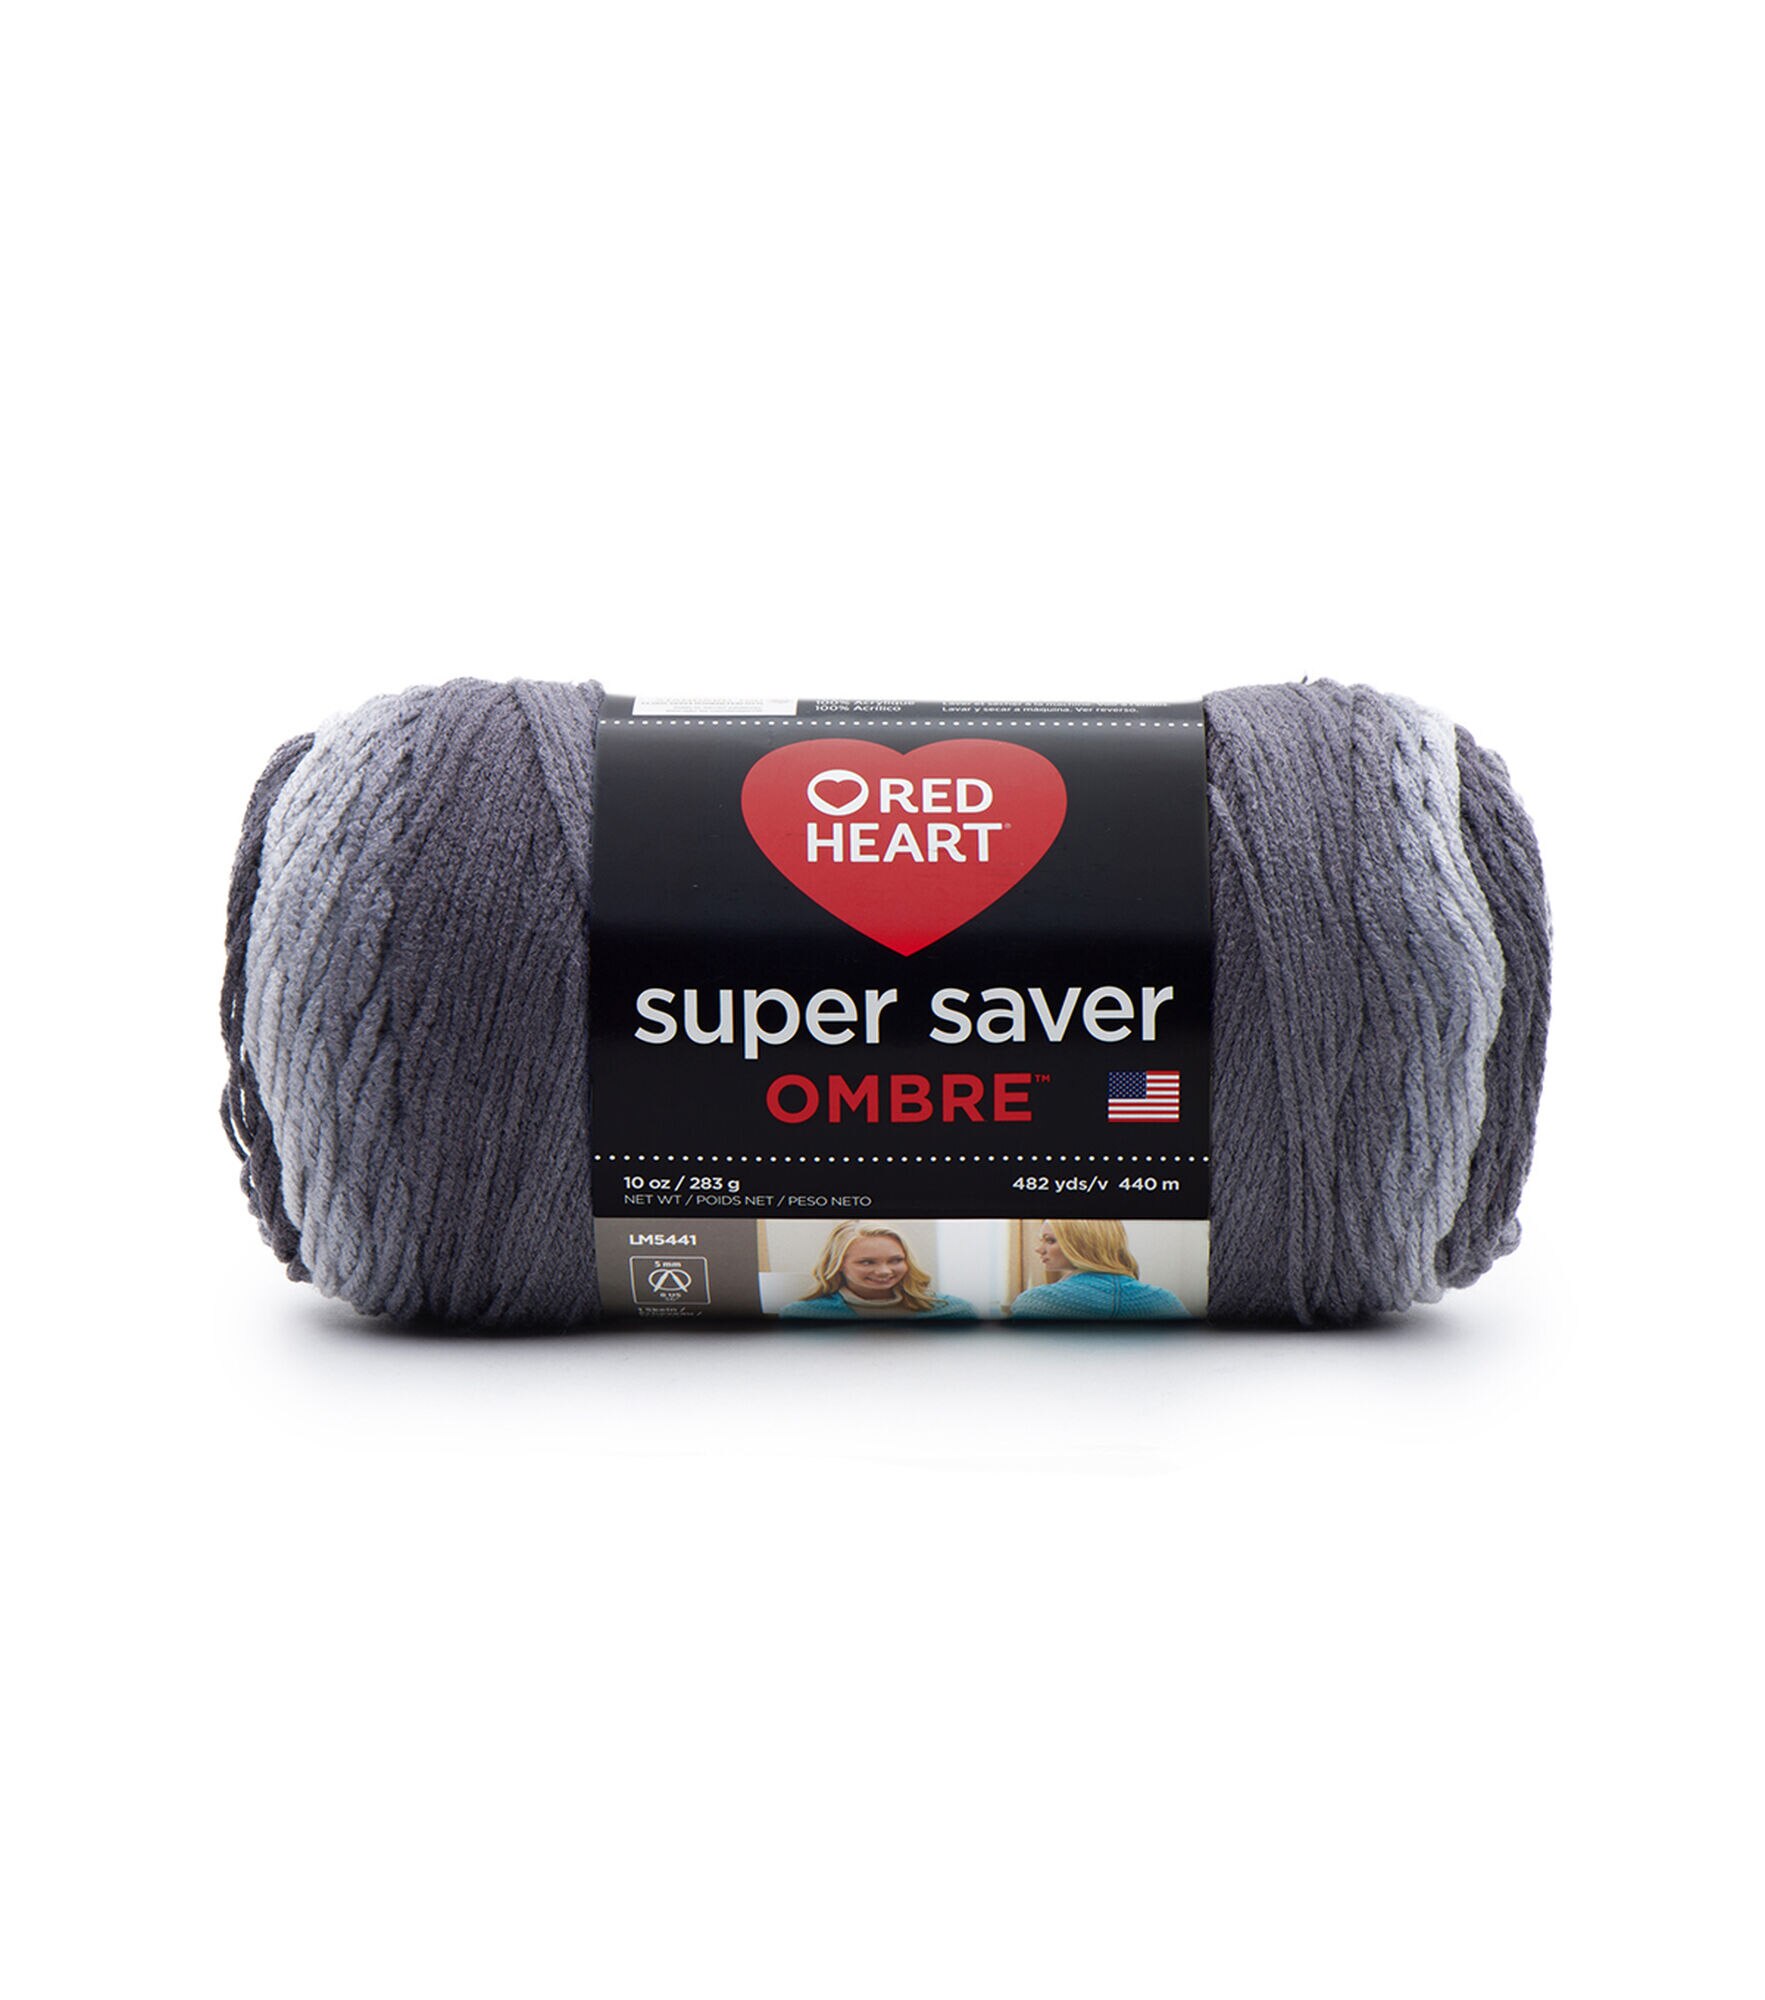 Red Heart Super Saver Ombre 482yds Worsted Acrylic Yarn, Anthracite, hi-res